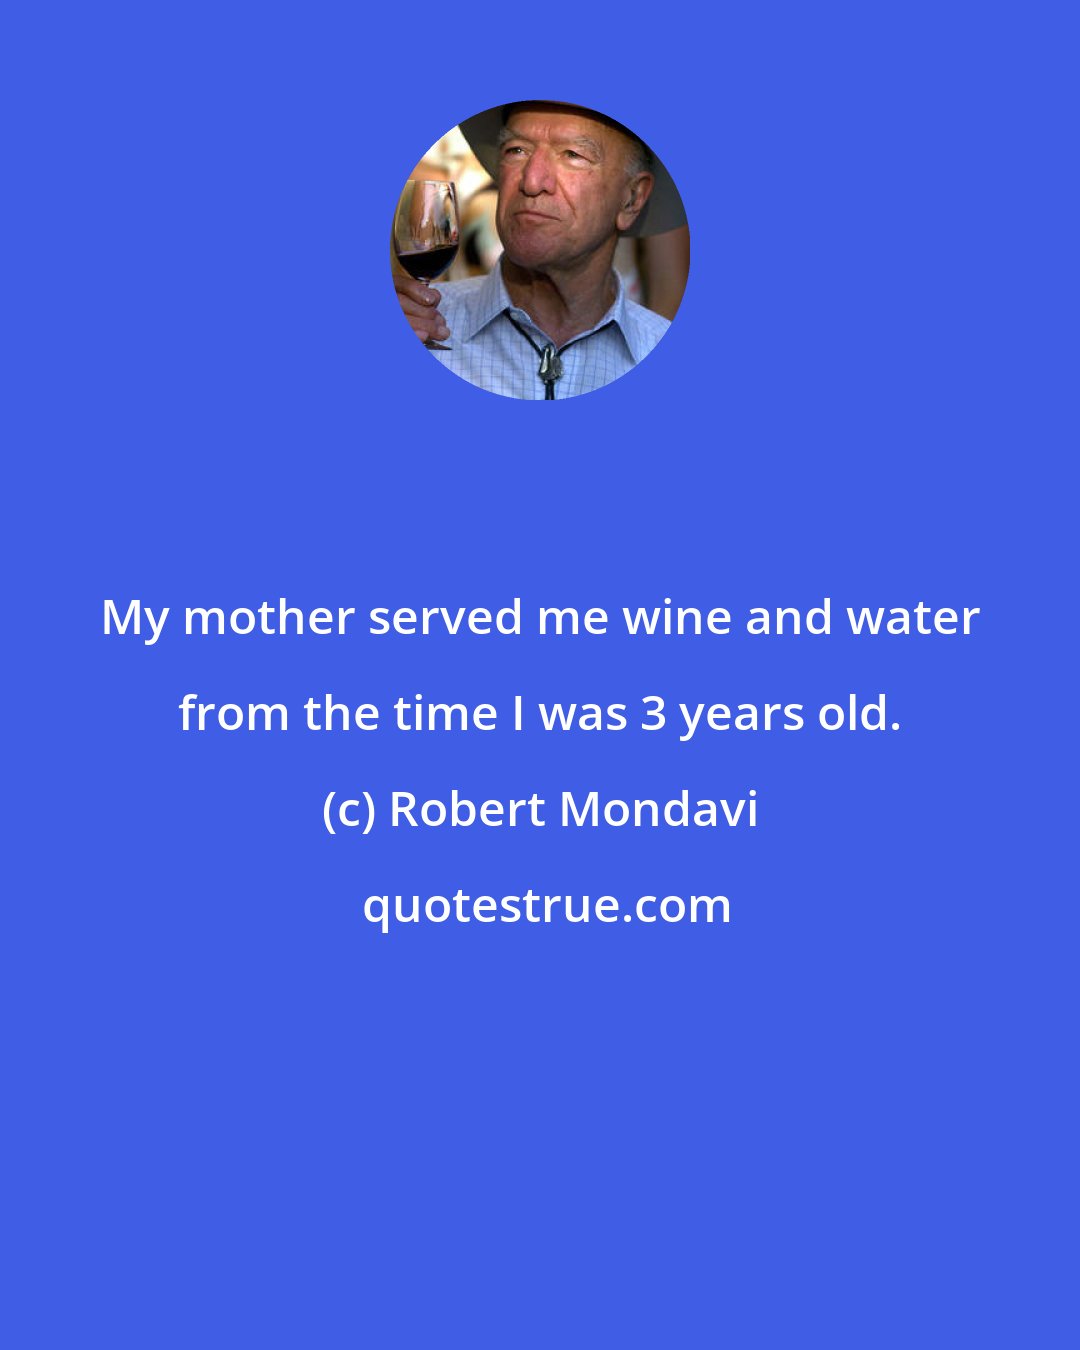 Robert Mondavi: My mother served me wine and water from the time I was 3 years old.